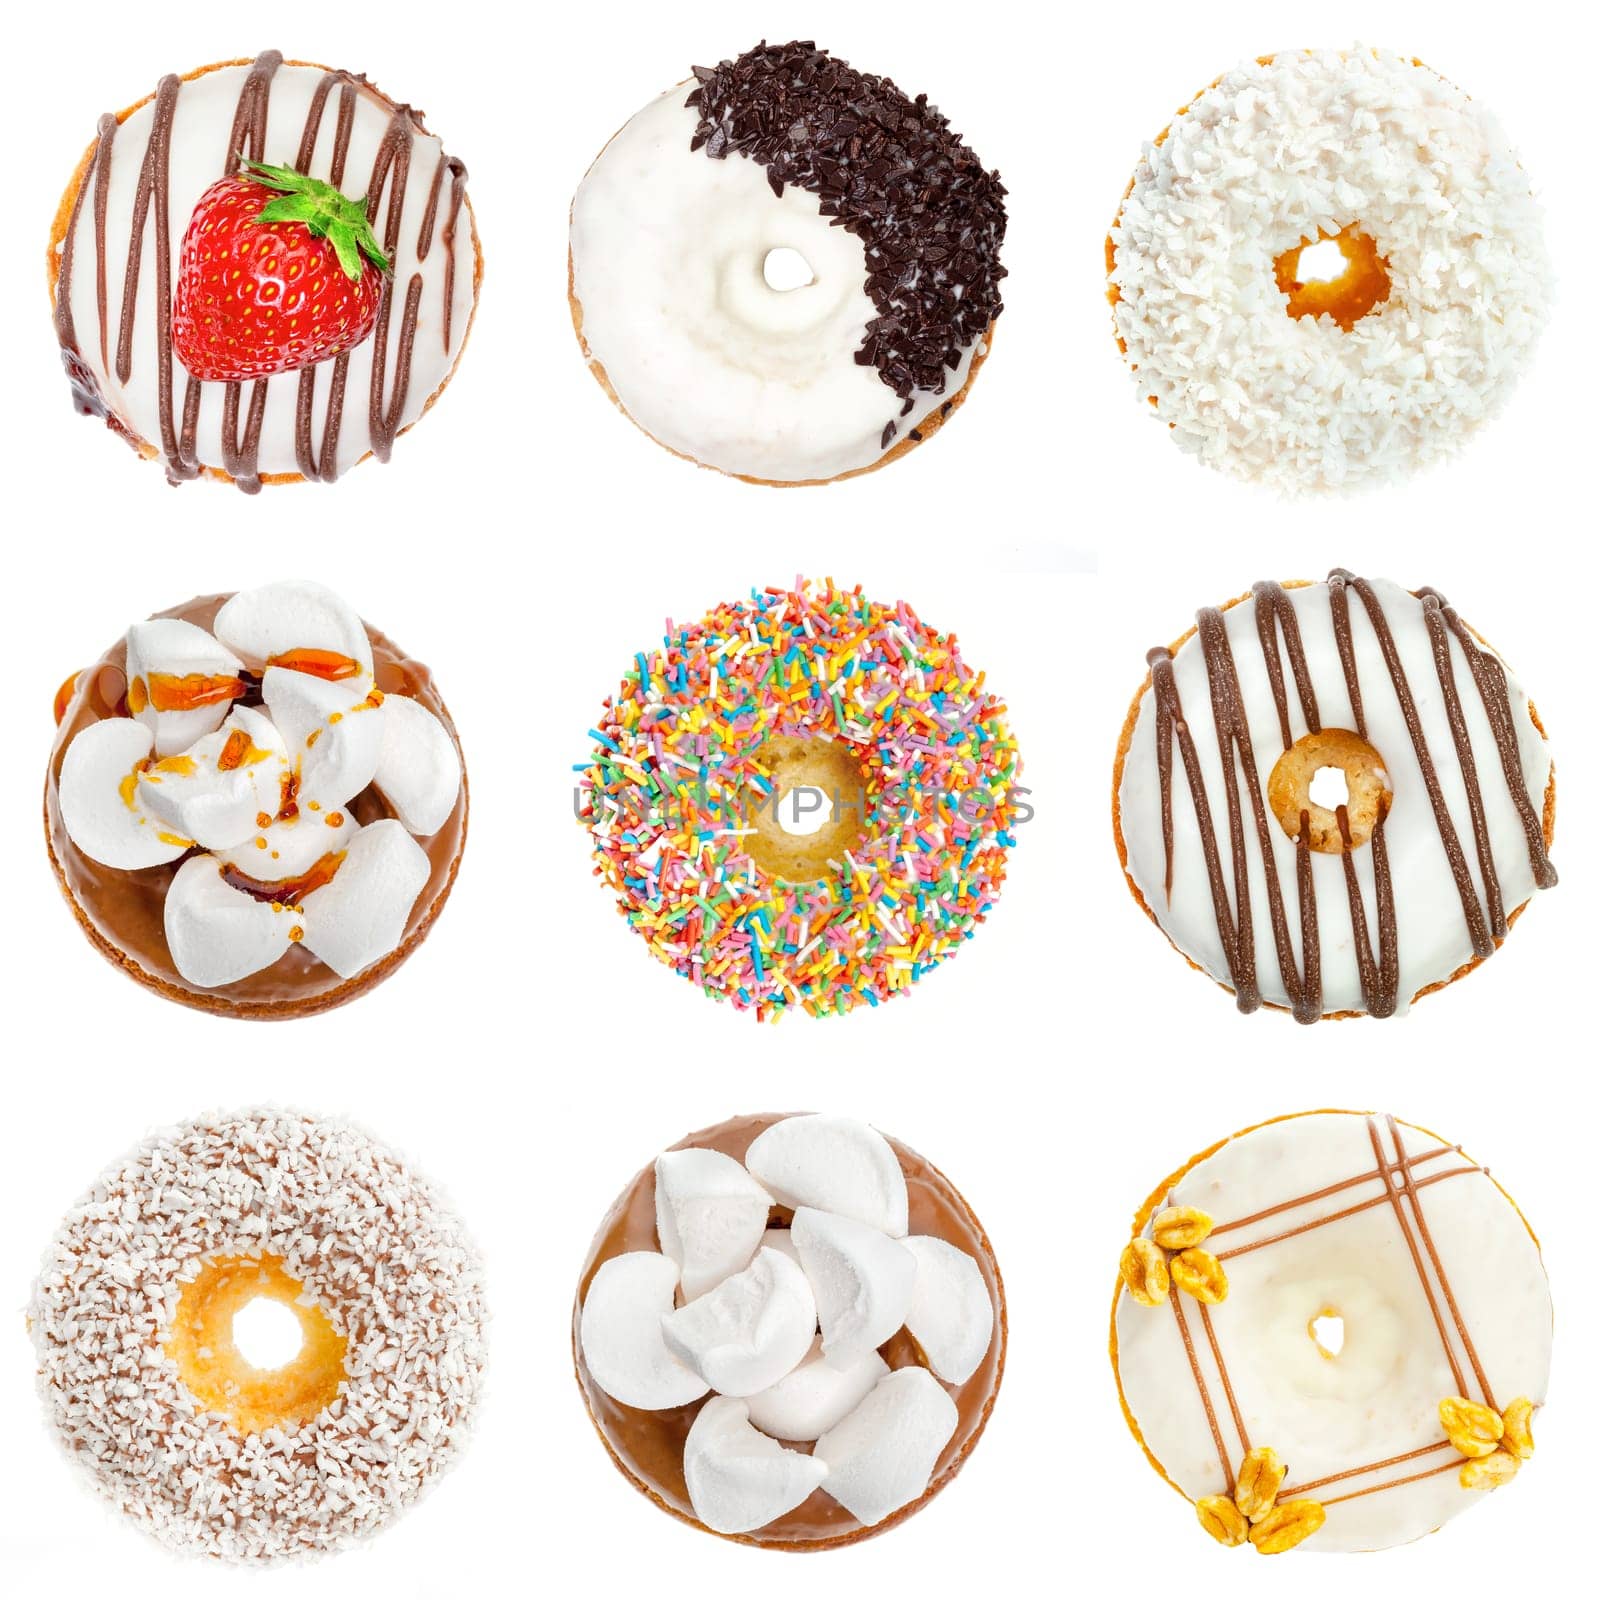 Delicious donuts collage, isolated on white by Fabrikasimf